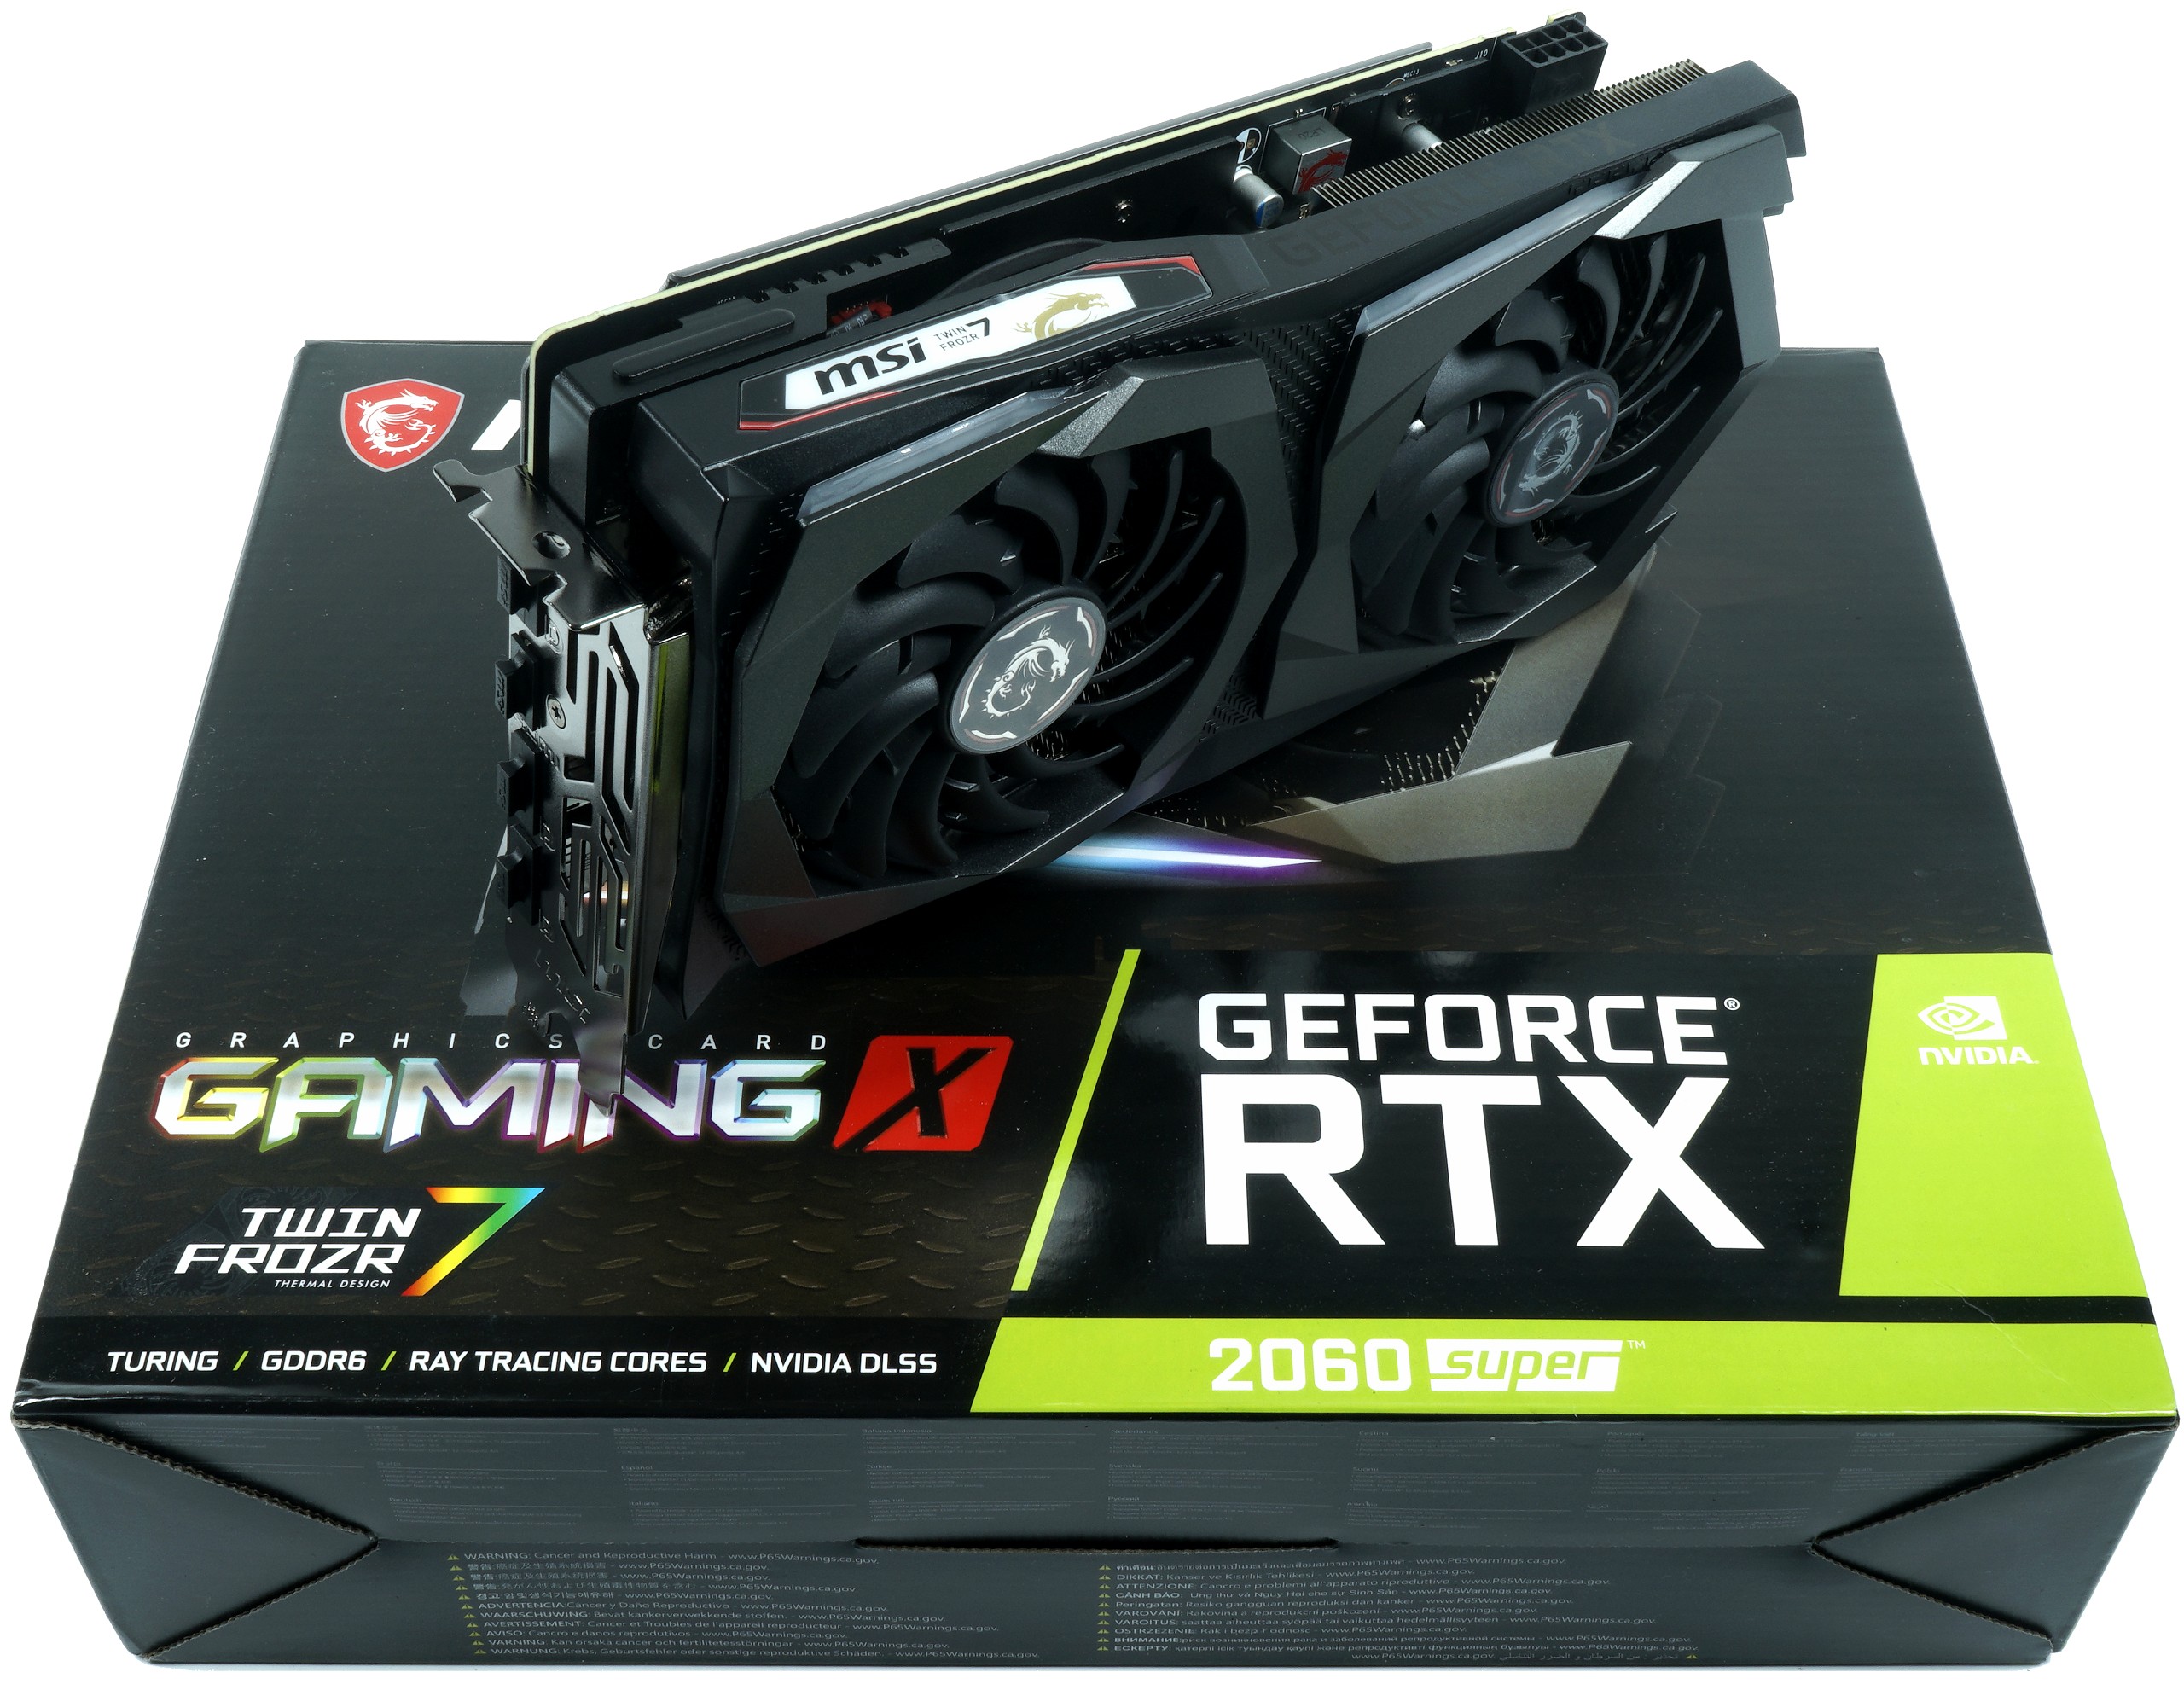 Prevented cannibal: MSI RTX 2060 Super Gaming X in review - quiet ...